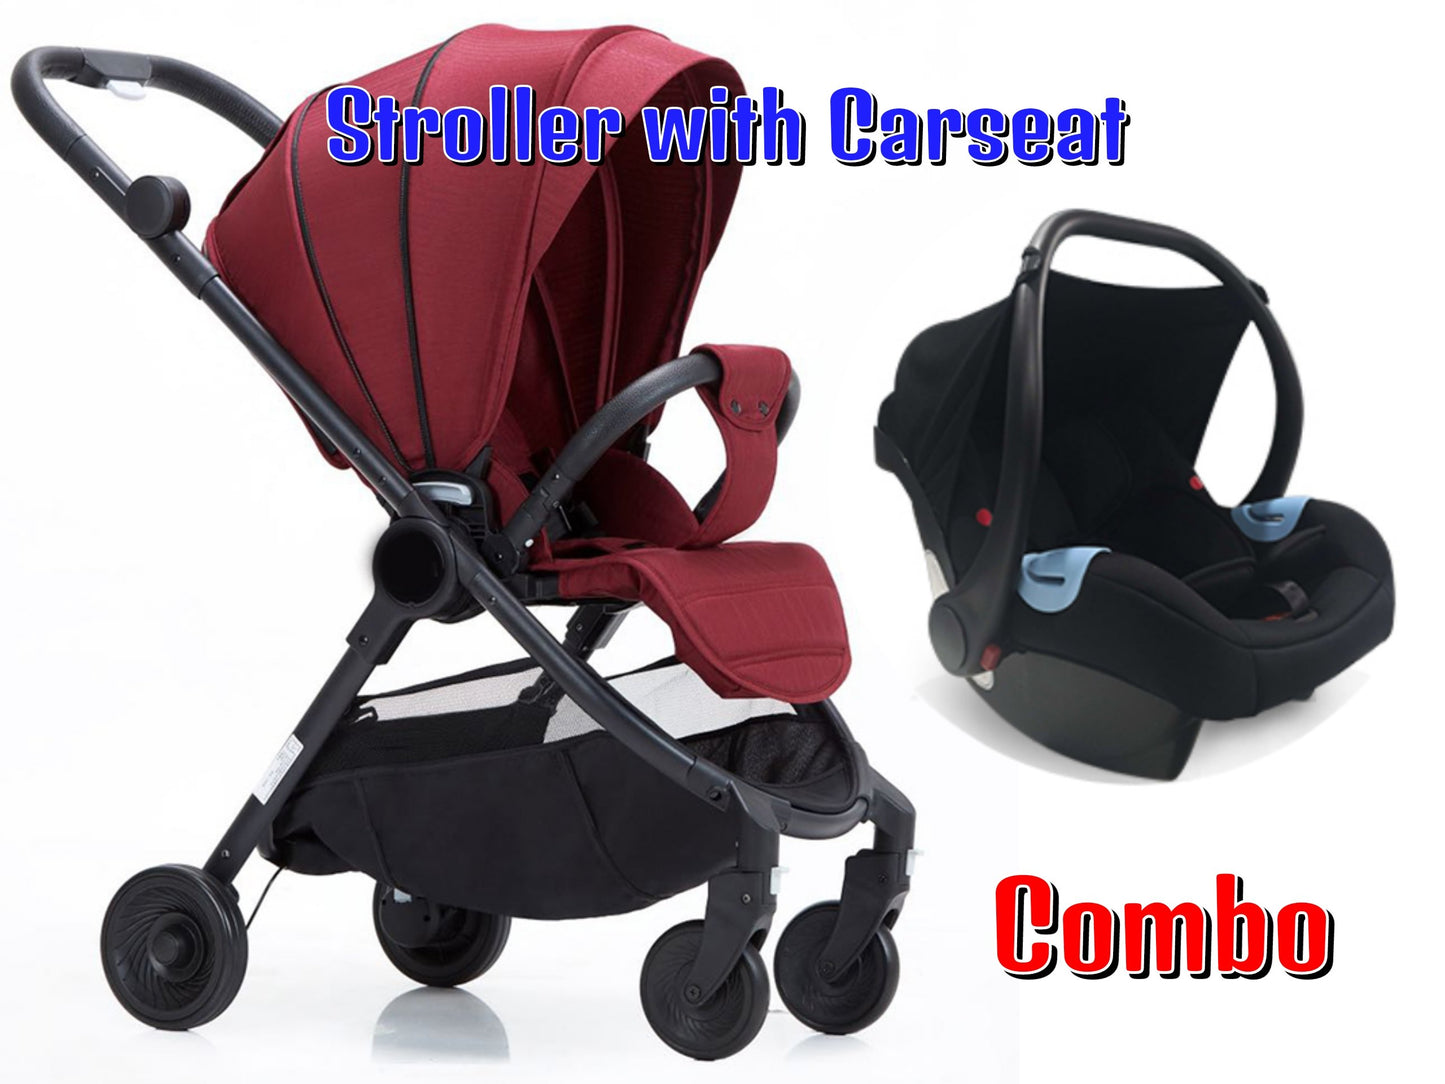 Baby Jogger City Tour Lightweight Stroller & Carseat - Travel 3 in 1